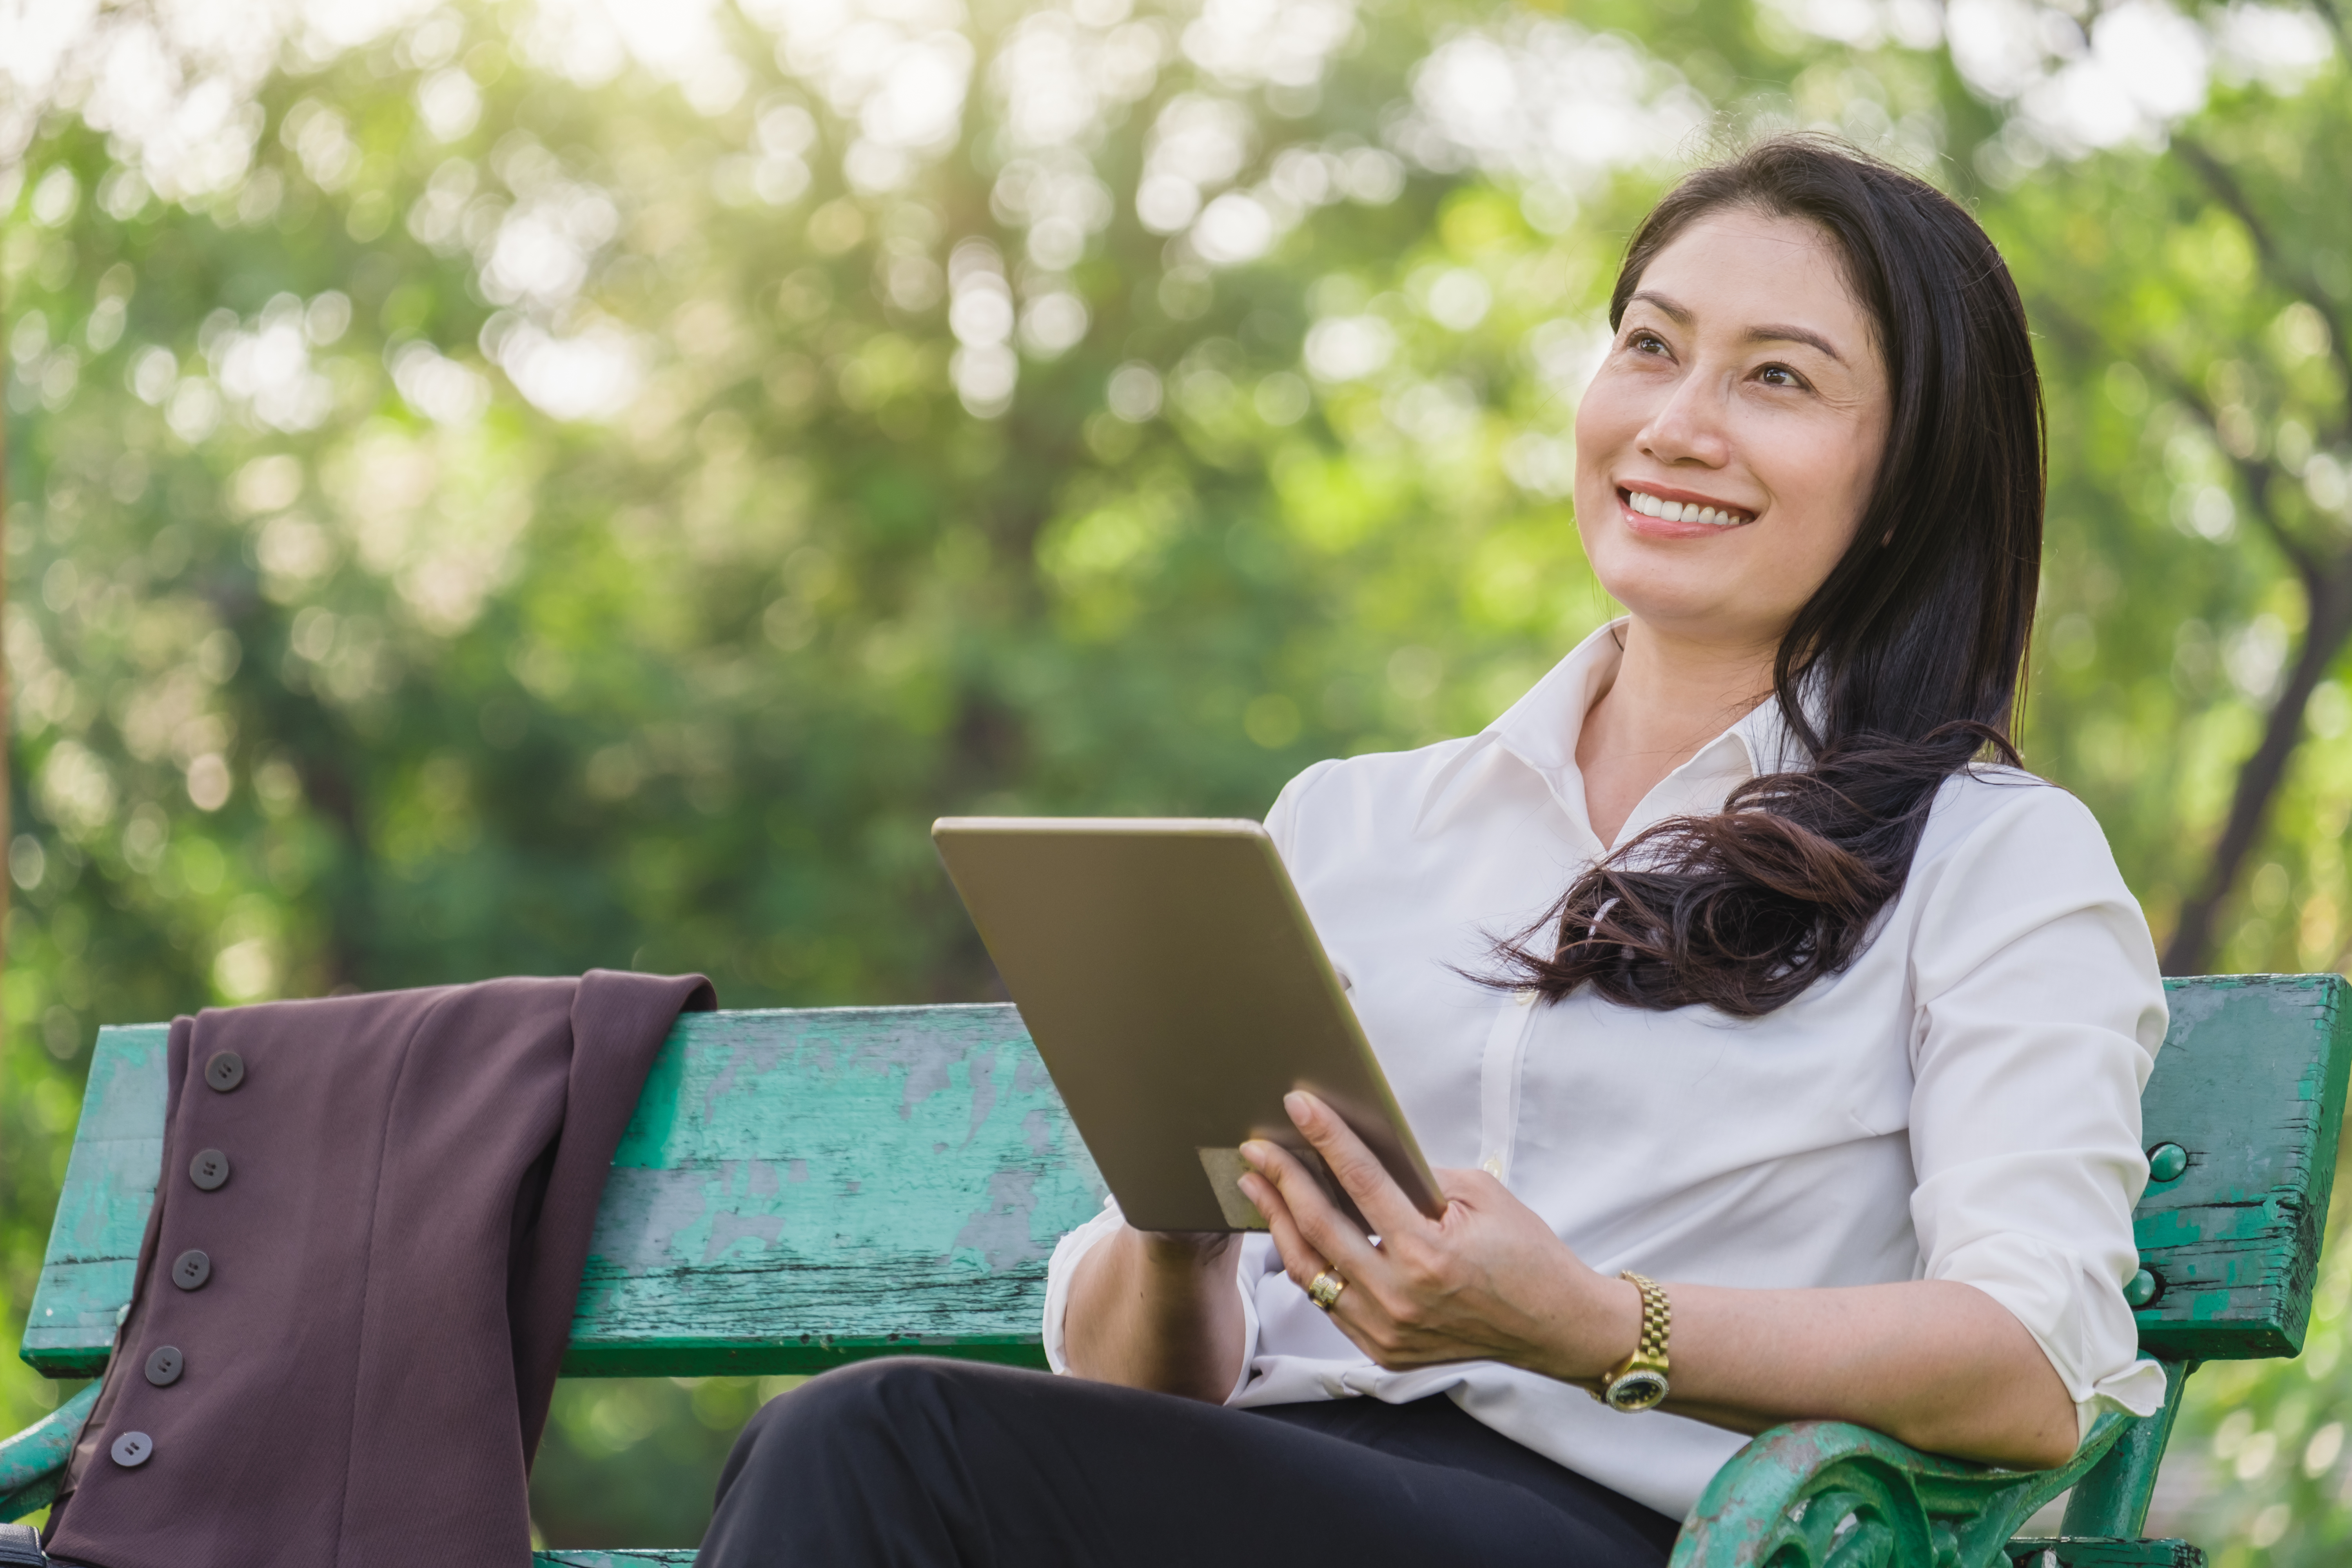 Businesswoman working from tablet outdoors in a park